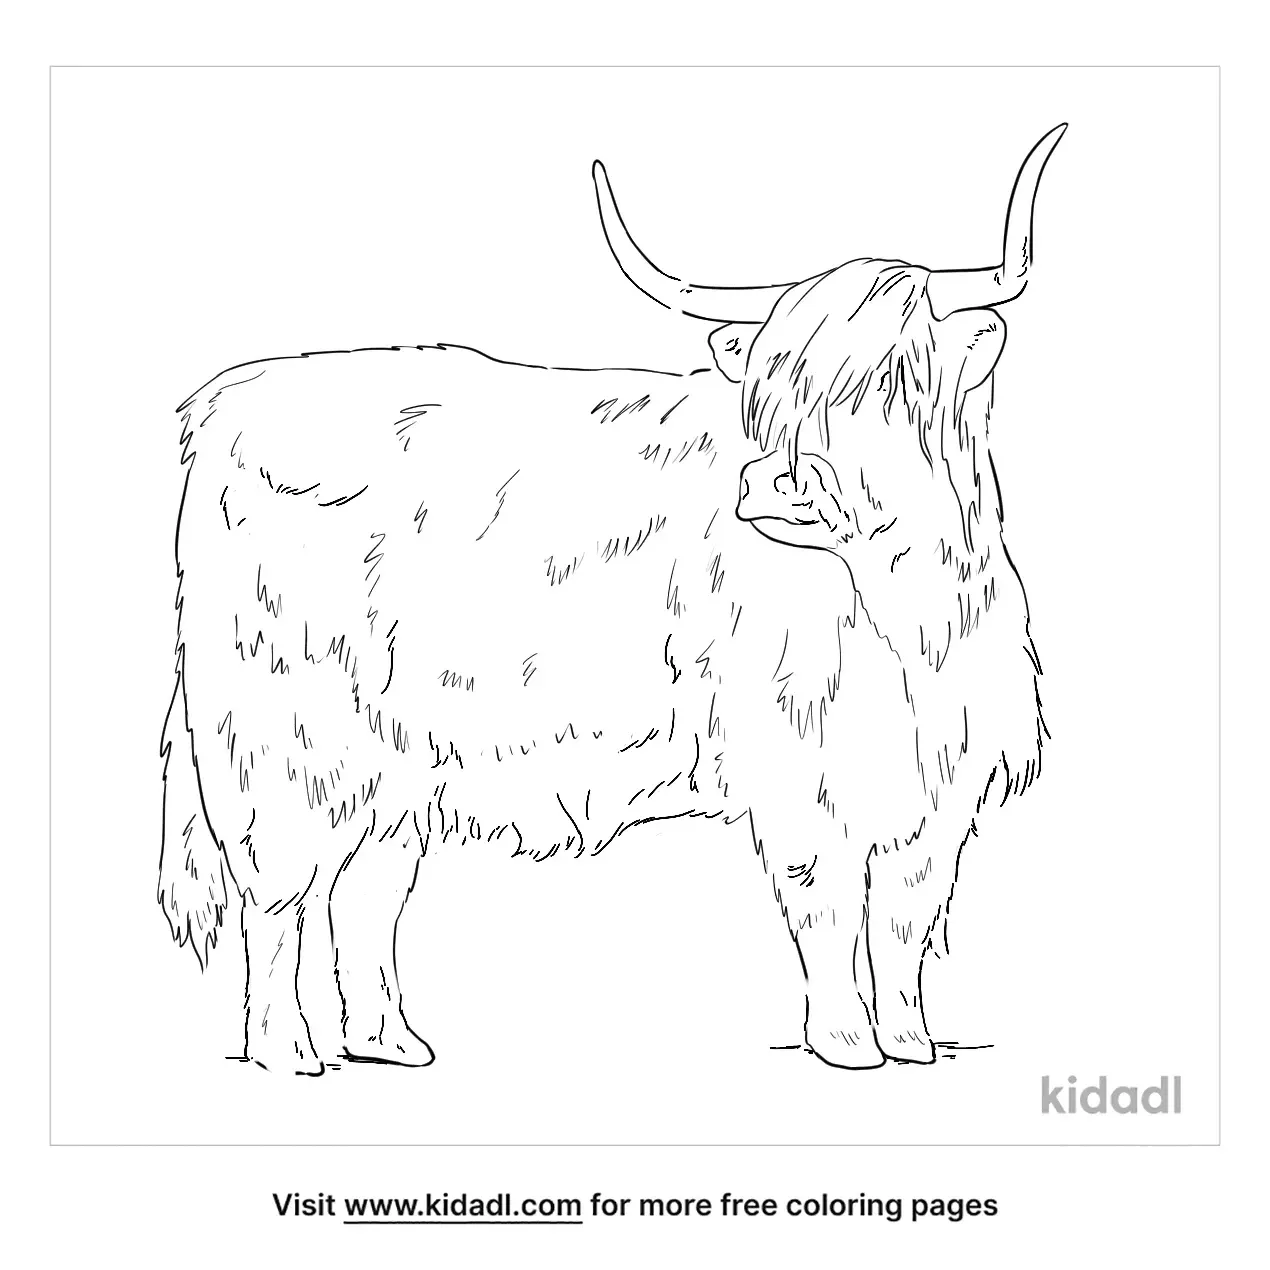 Free Highland Cattle Coloring Page Coloring Page Printables Kidadl